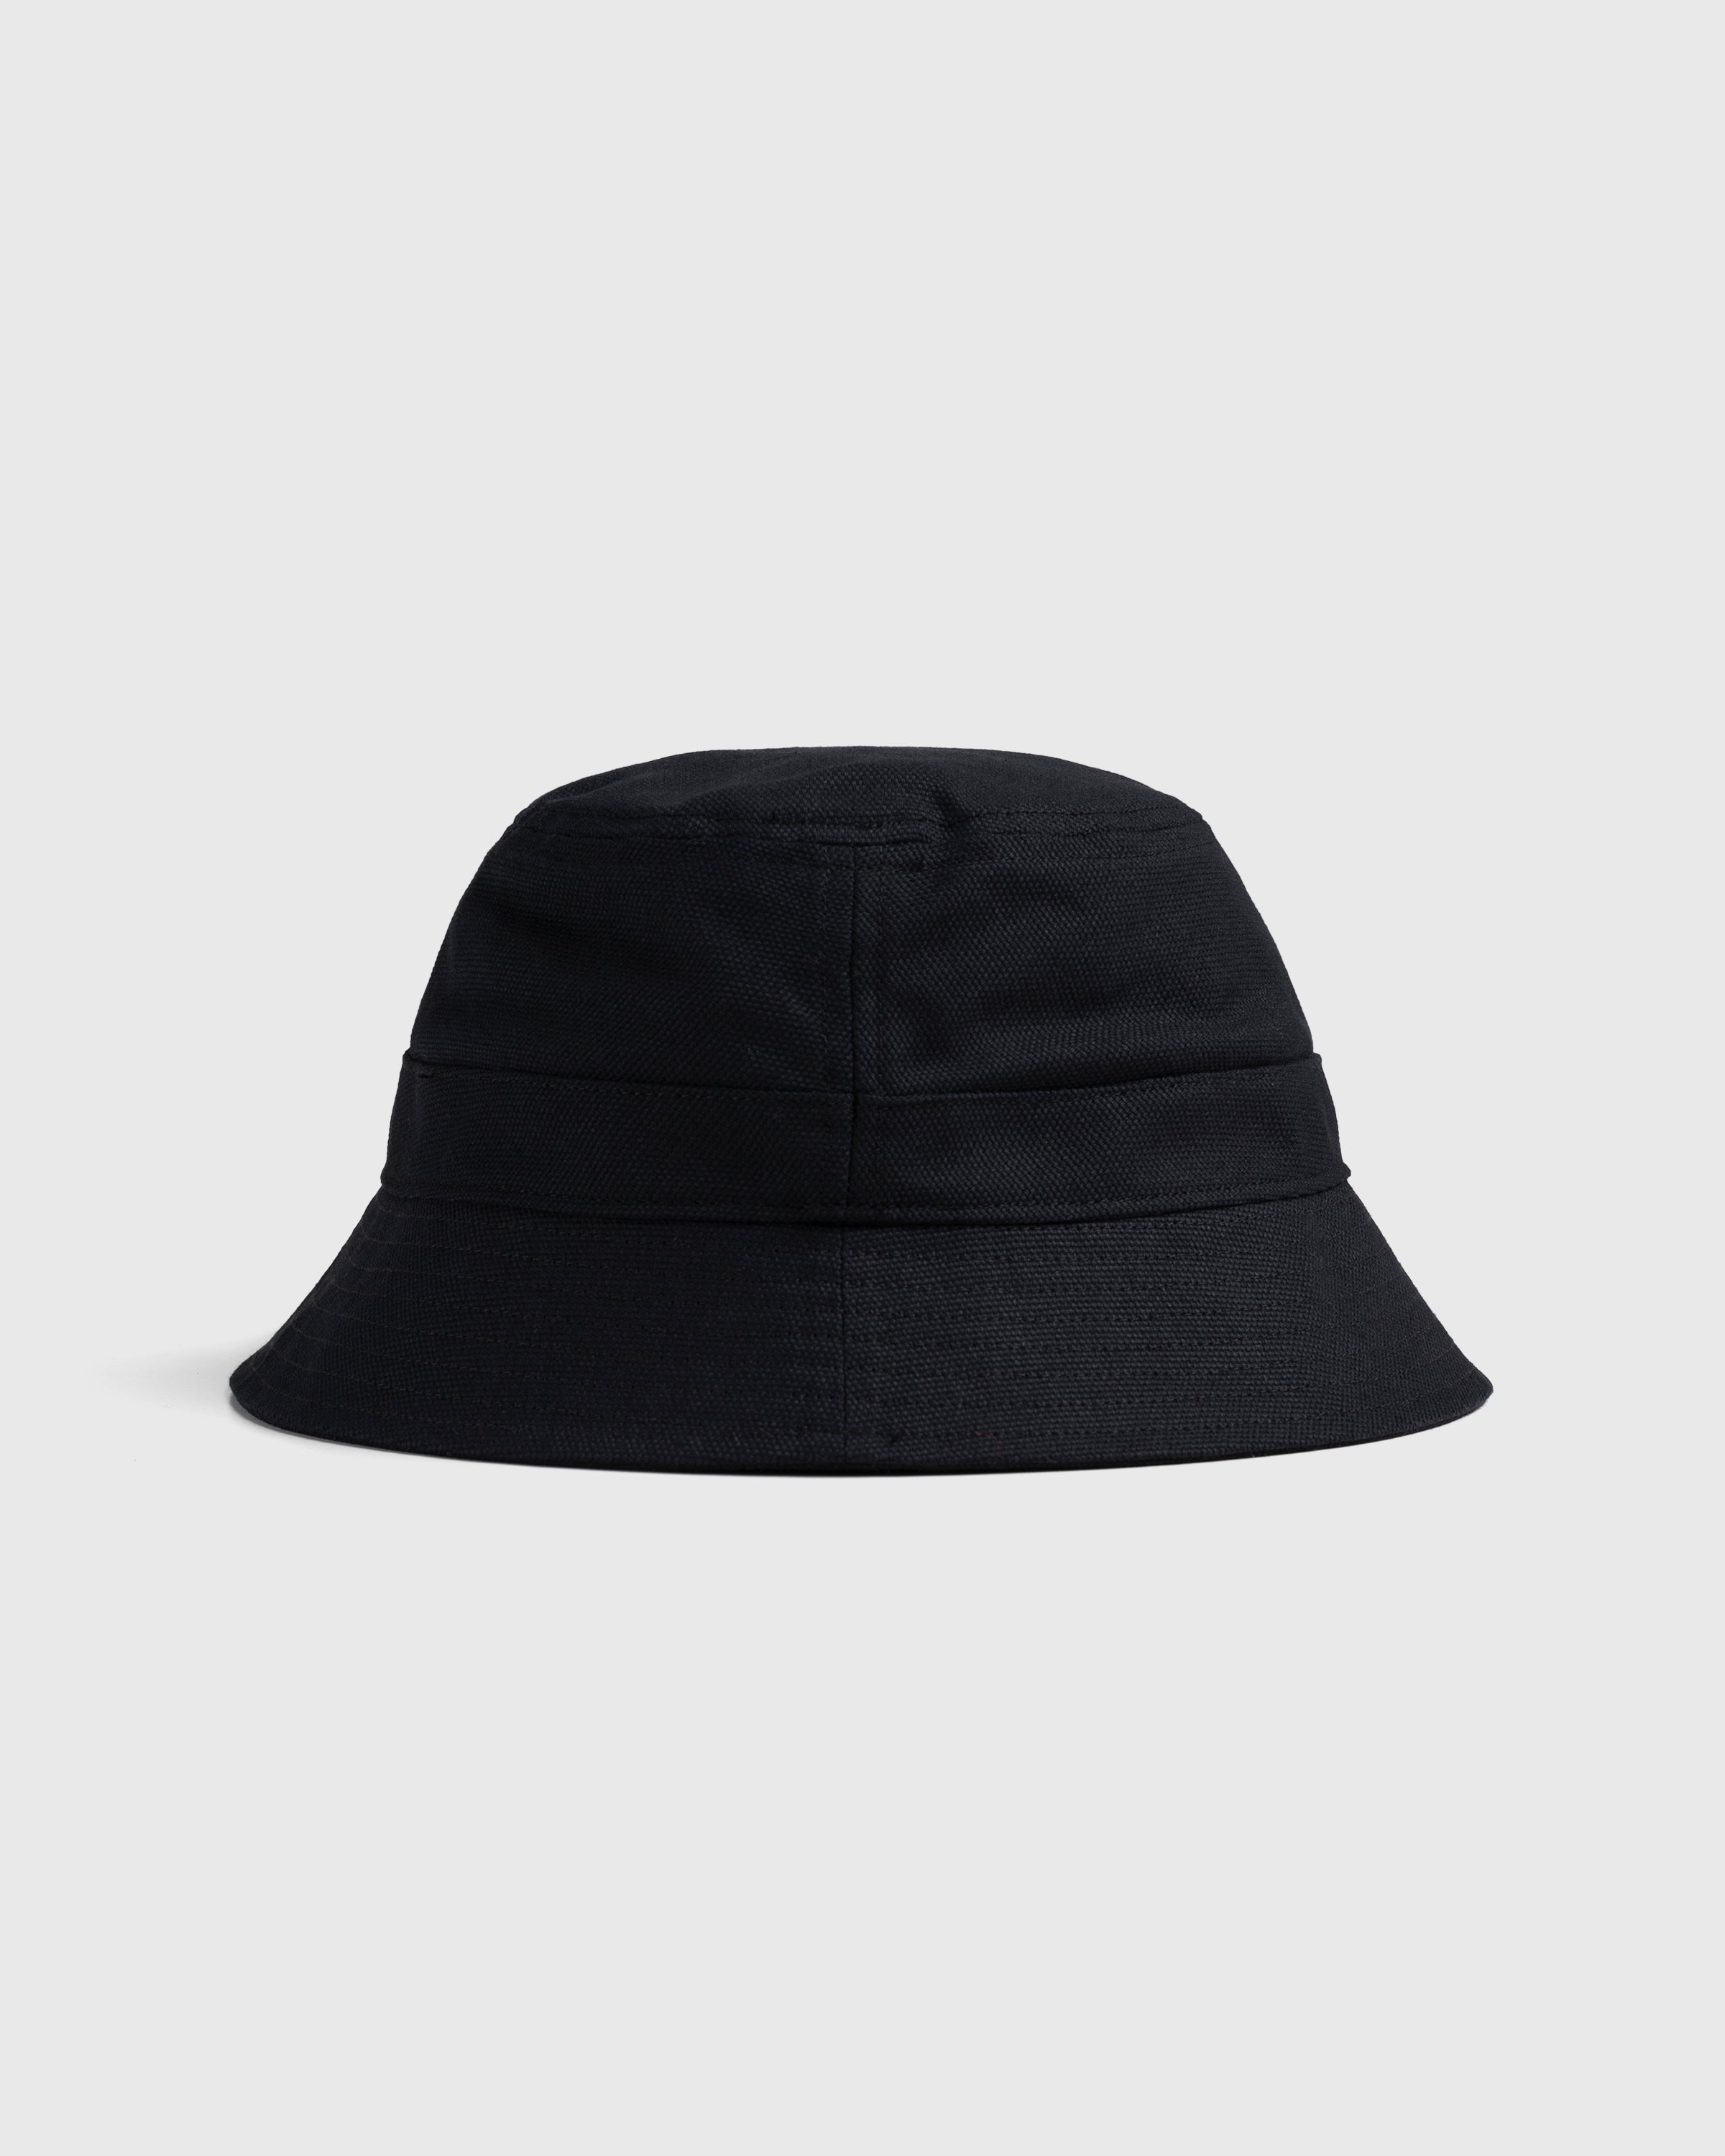 The North Face – Mountain Bucket Hat TNF Black | Highsnobiety Shop